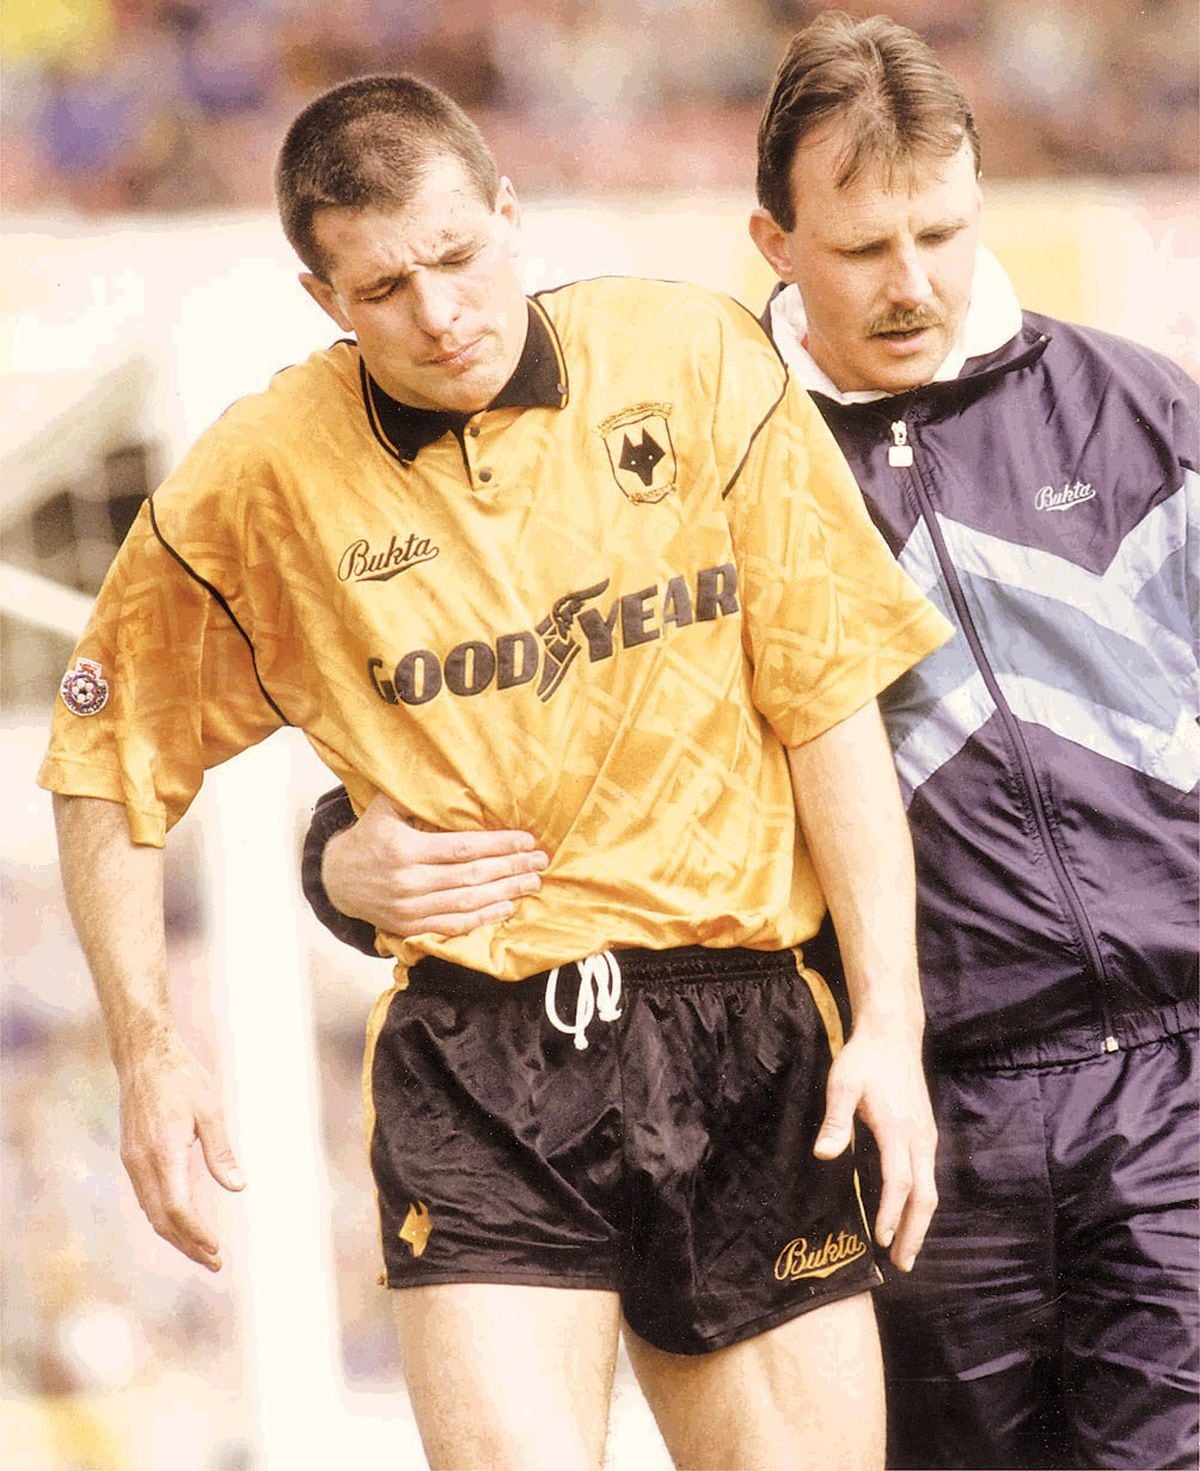 Steve Bull is helped off the pitch by physio Paul Darby in the 1991/92 season